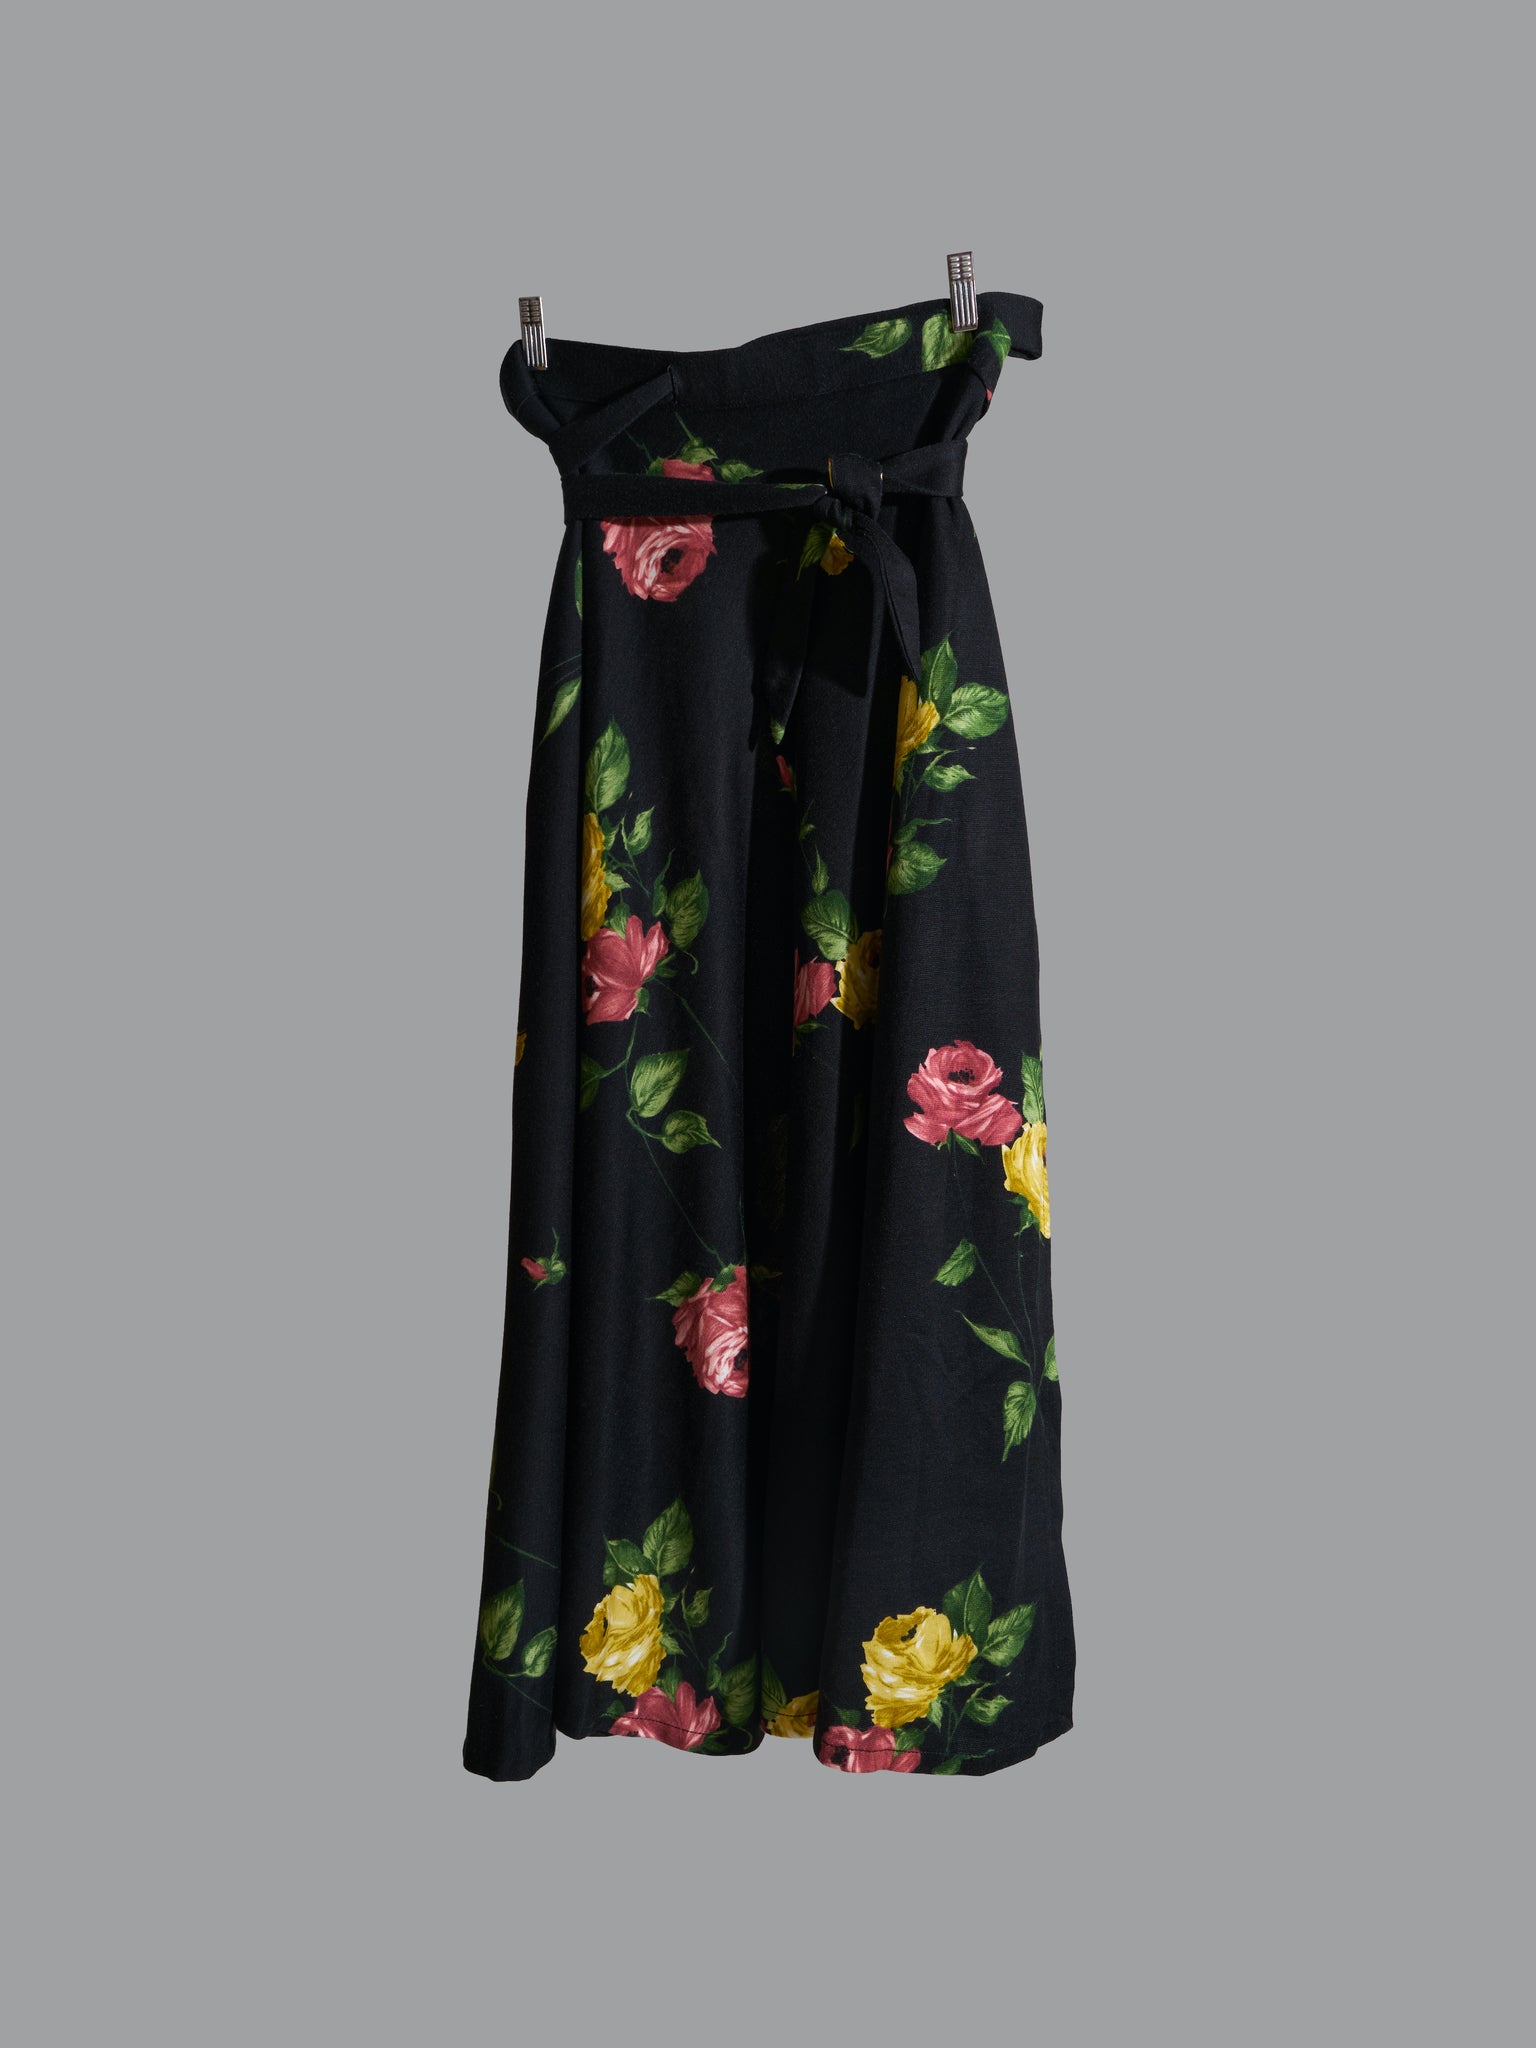 vintage 1970s black polyester wrap skirt with red and yellow floral rose print